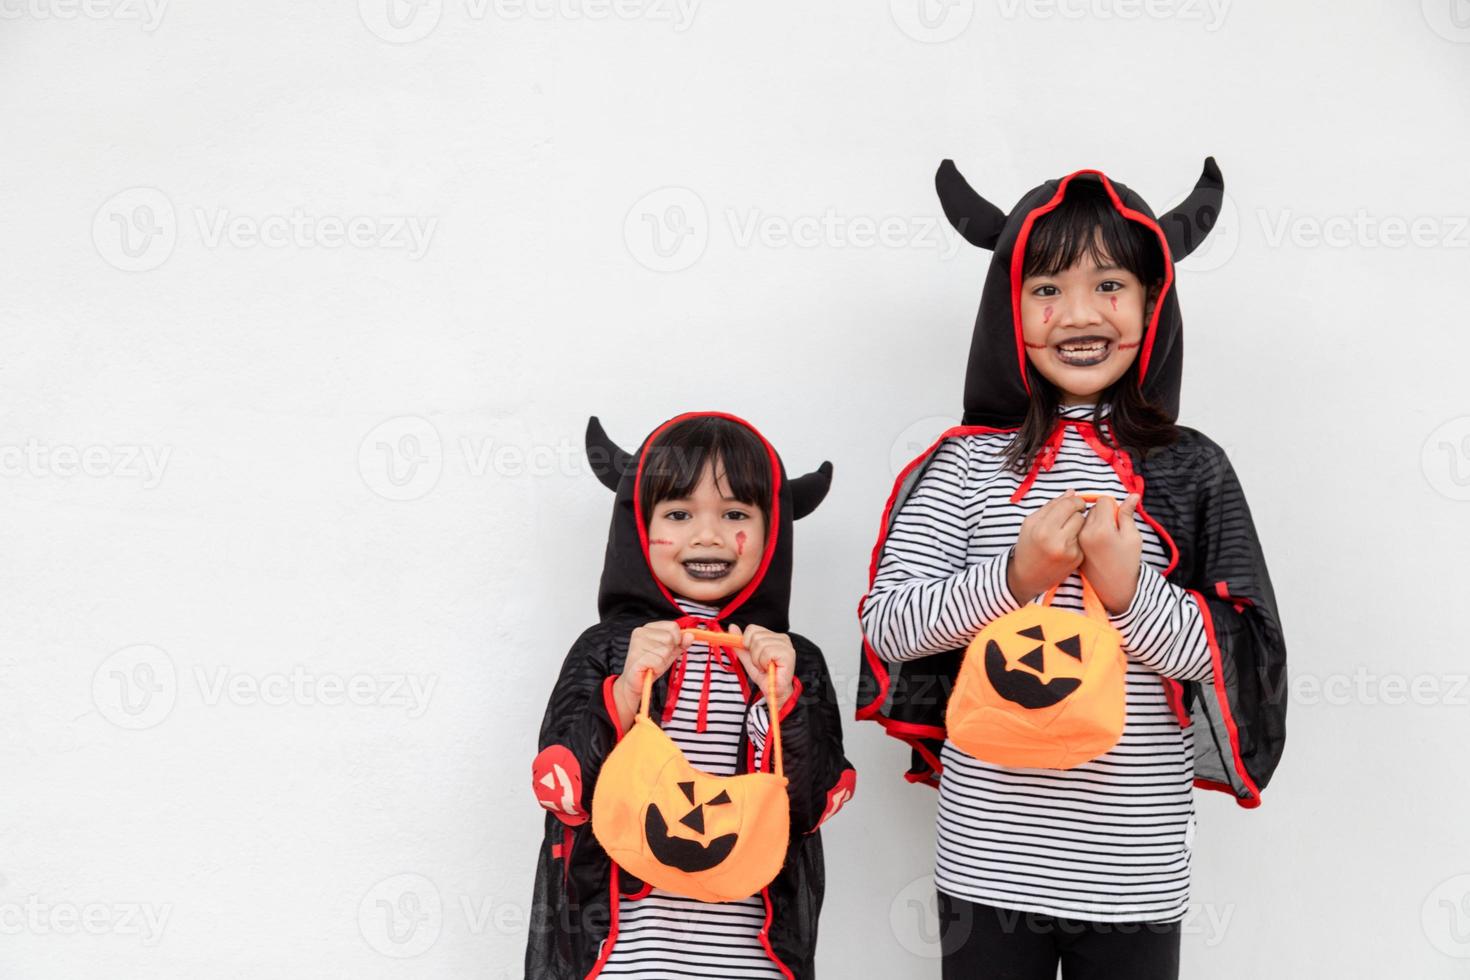 happy Halloween two children in Halloween costumes and with pumpkins on white background photo